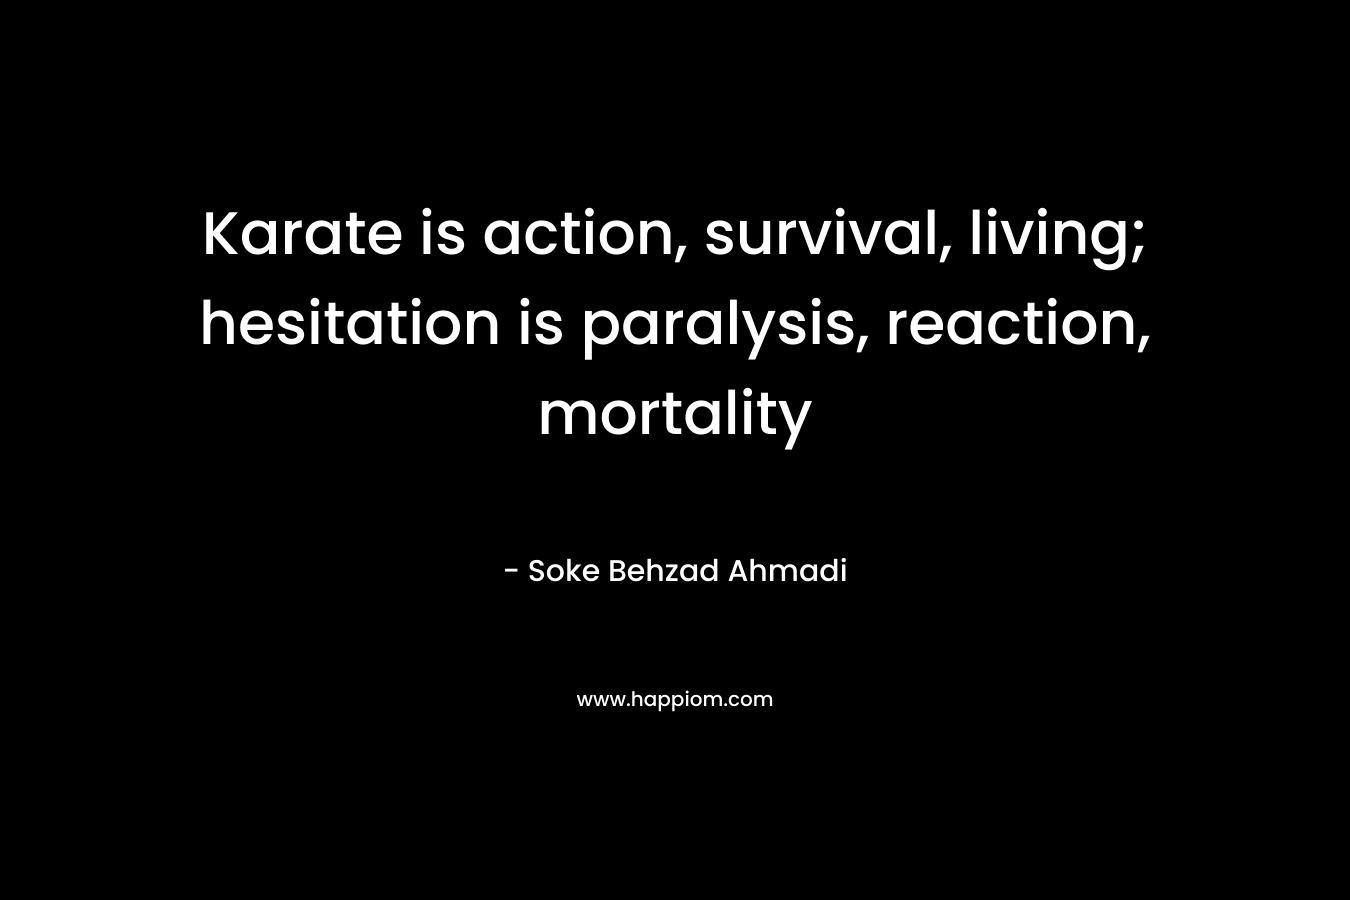 Karate is action, survival, living; hesitation is paralysis, reaction, mortality